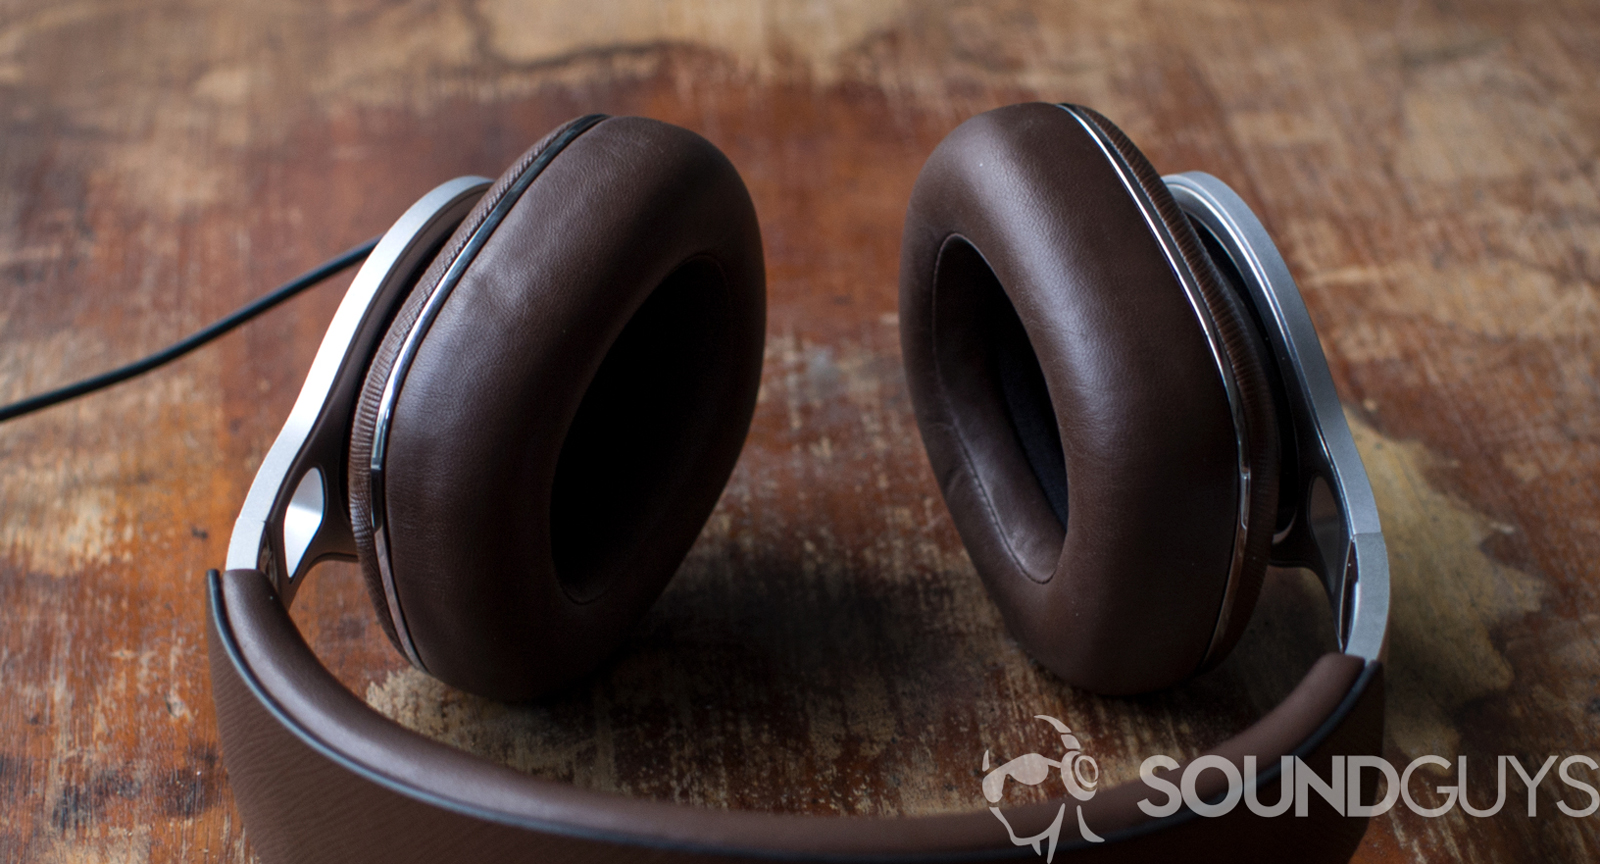 A photo of the Bowers and Wilkins P9 Signature's ear pads.